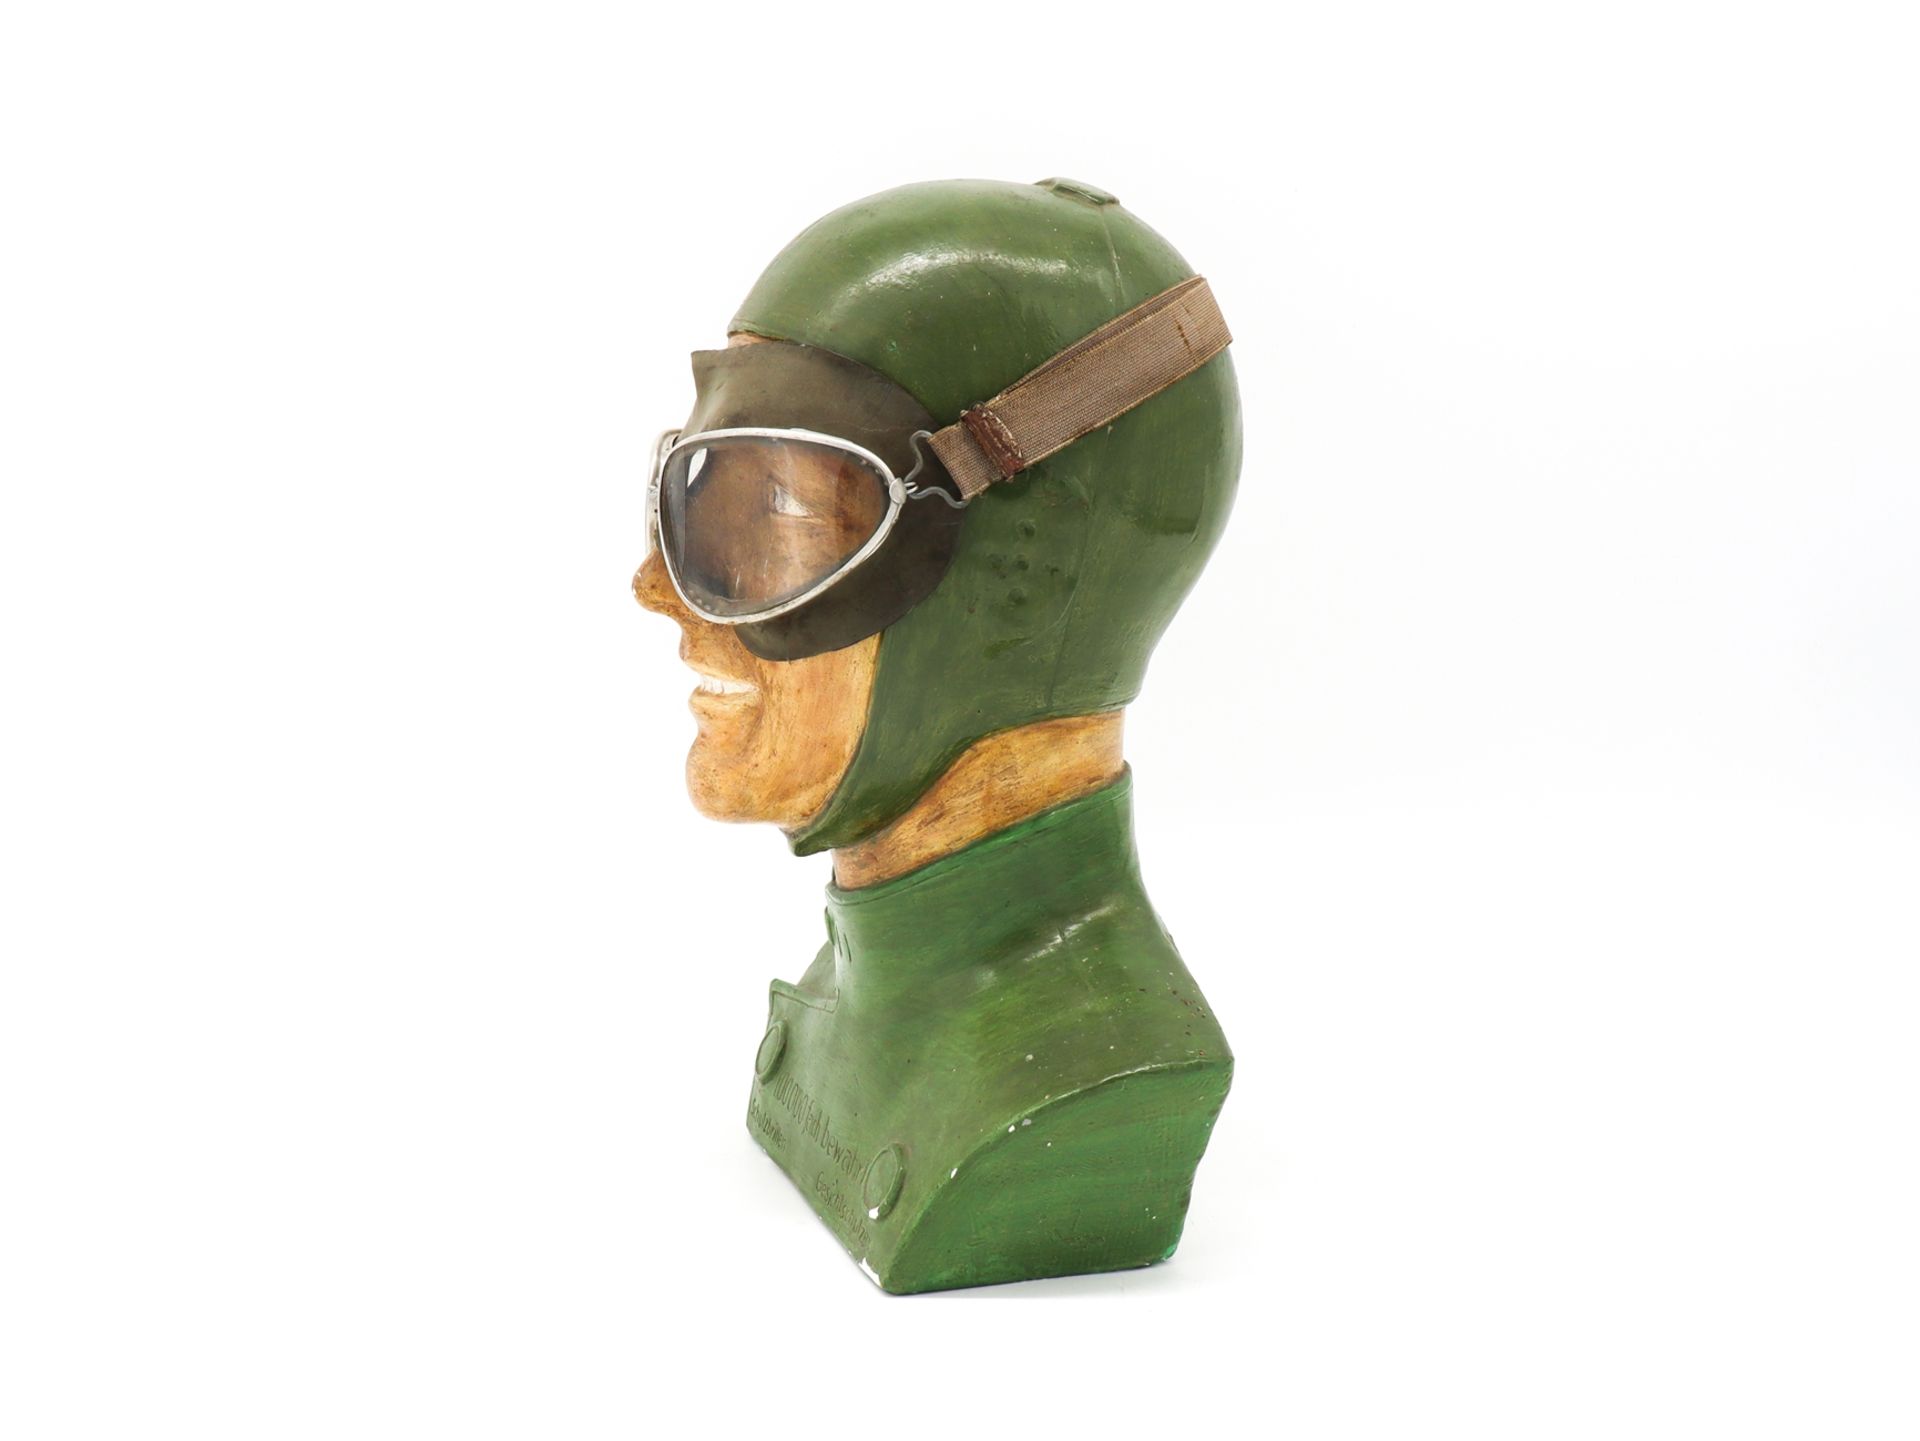 Advertising figure for protective goggles, curiosity, around 1920  - Image 4 of 5